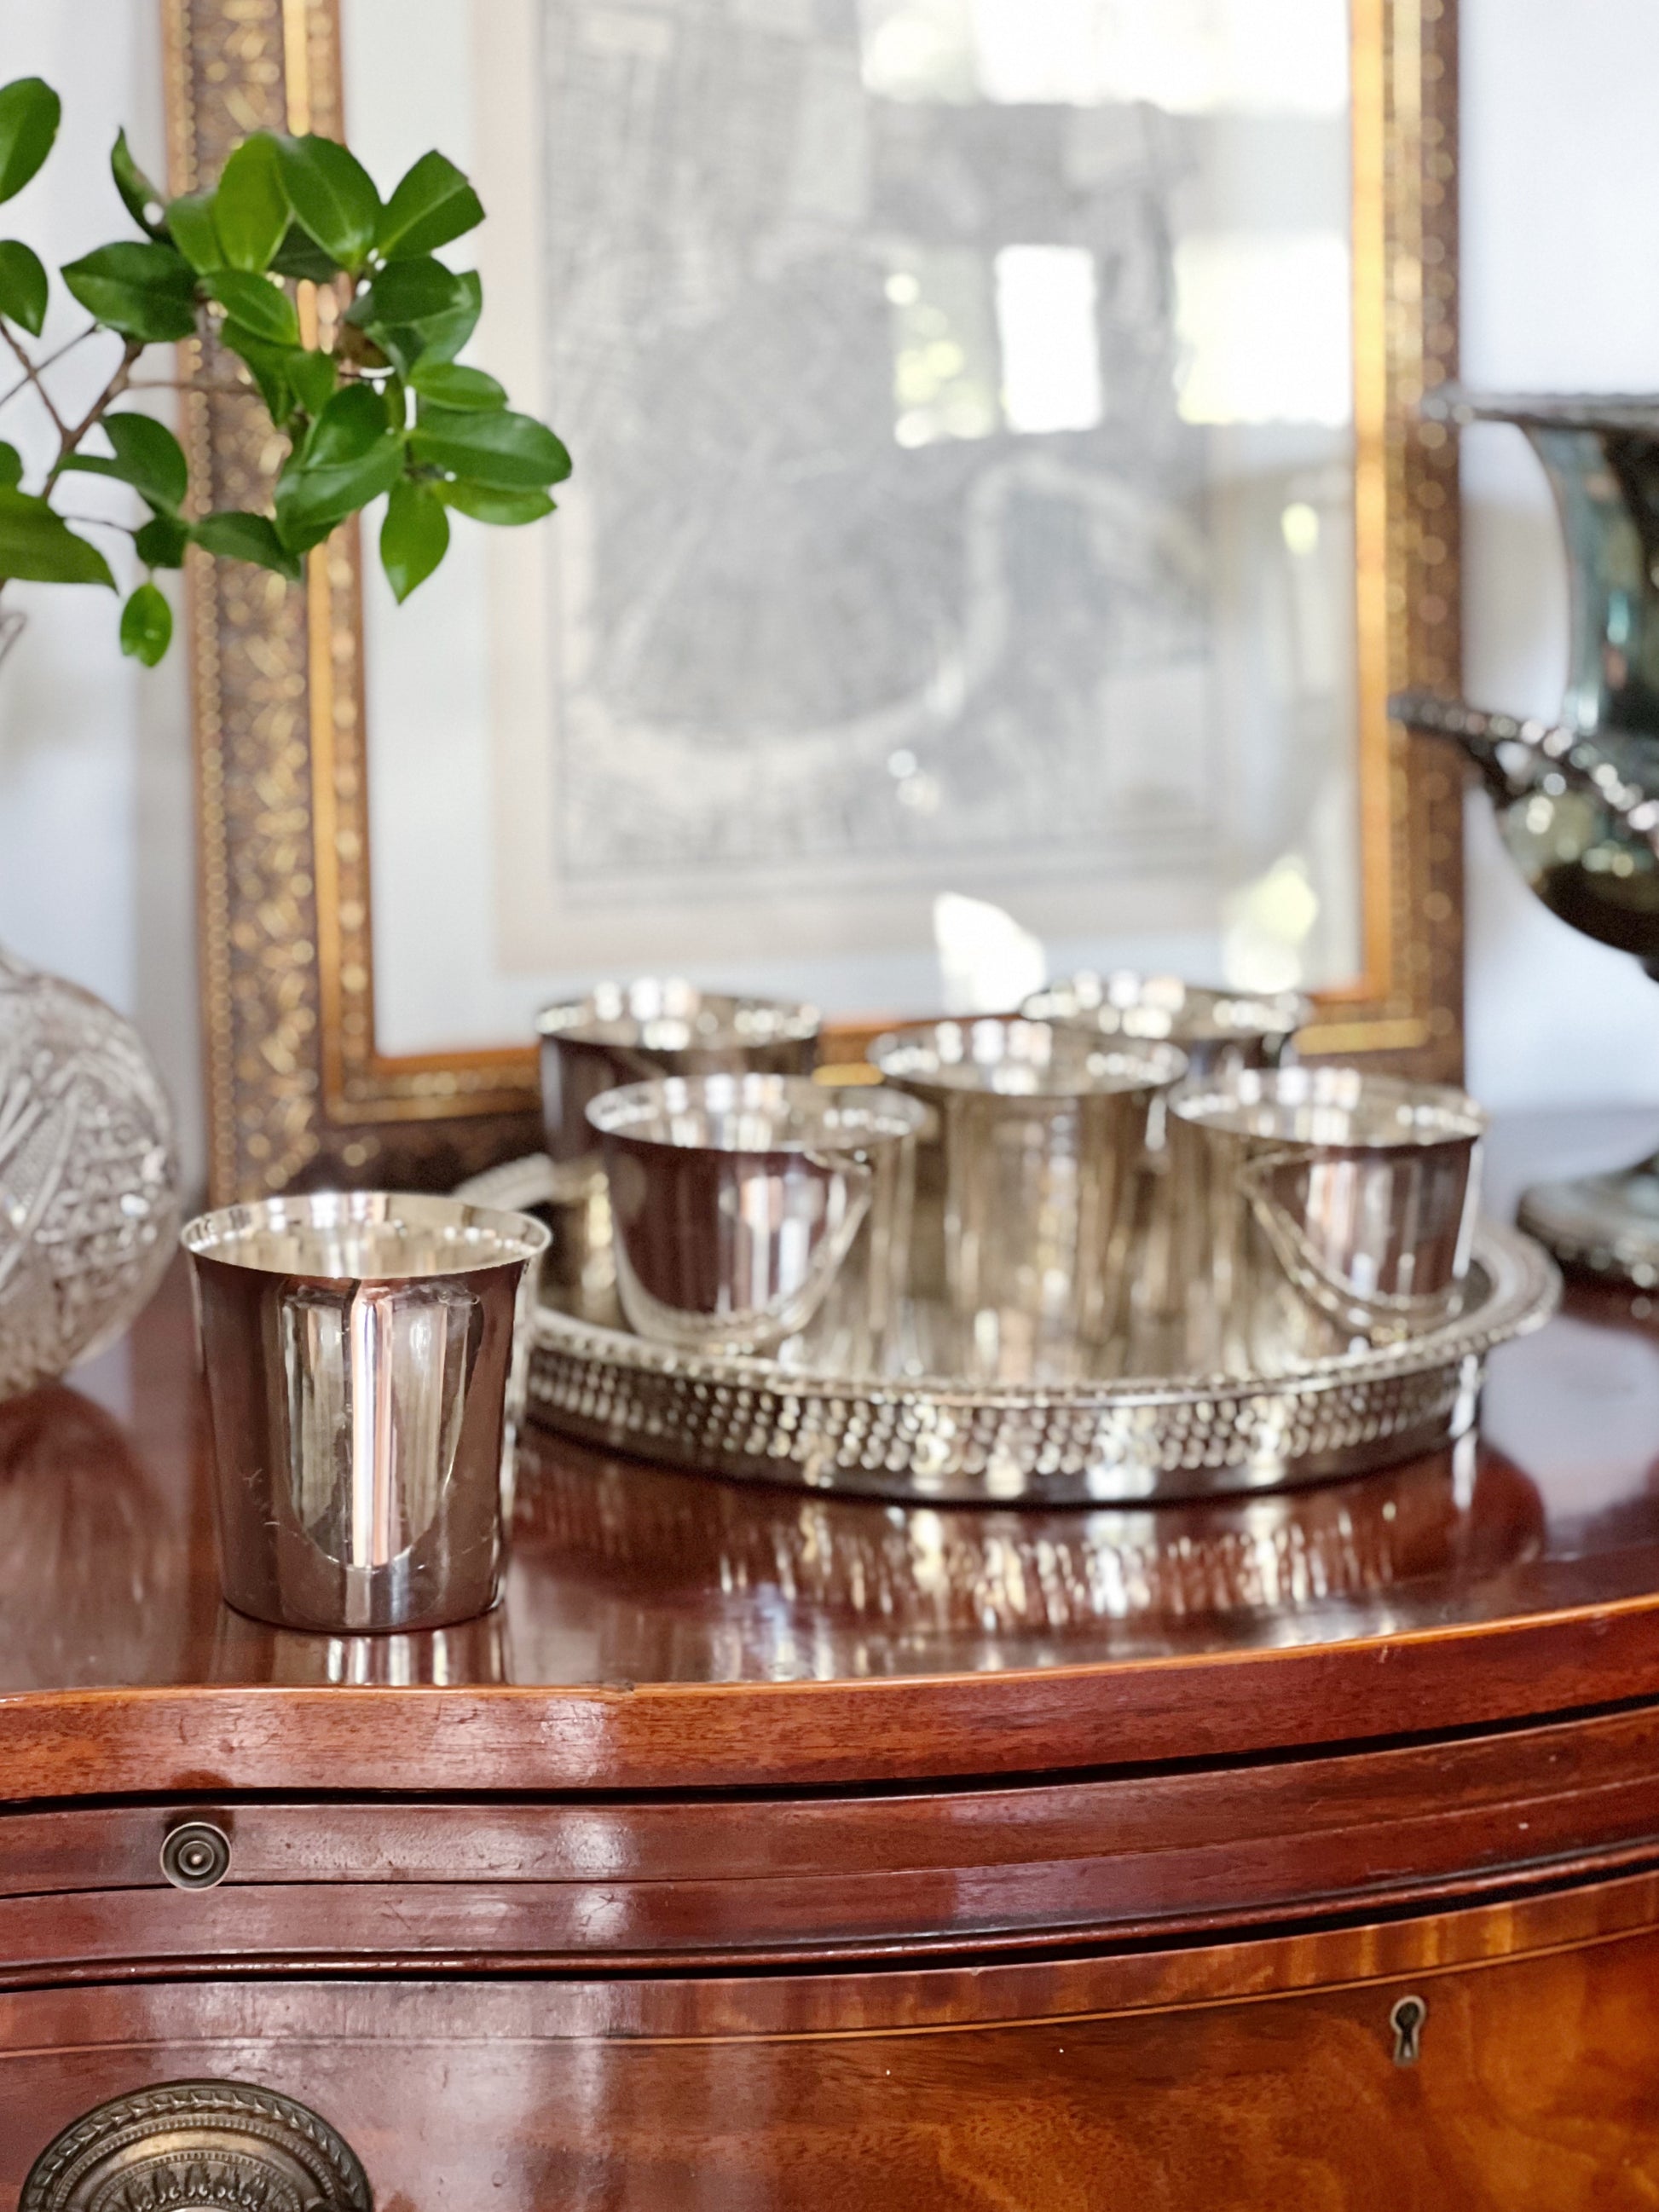 set of 6 vintage silver mint julep cups on silver tray on wooden dresser